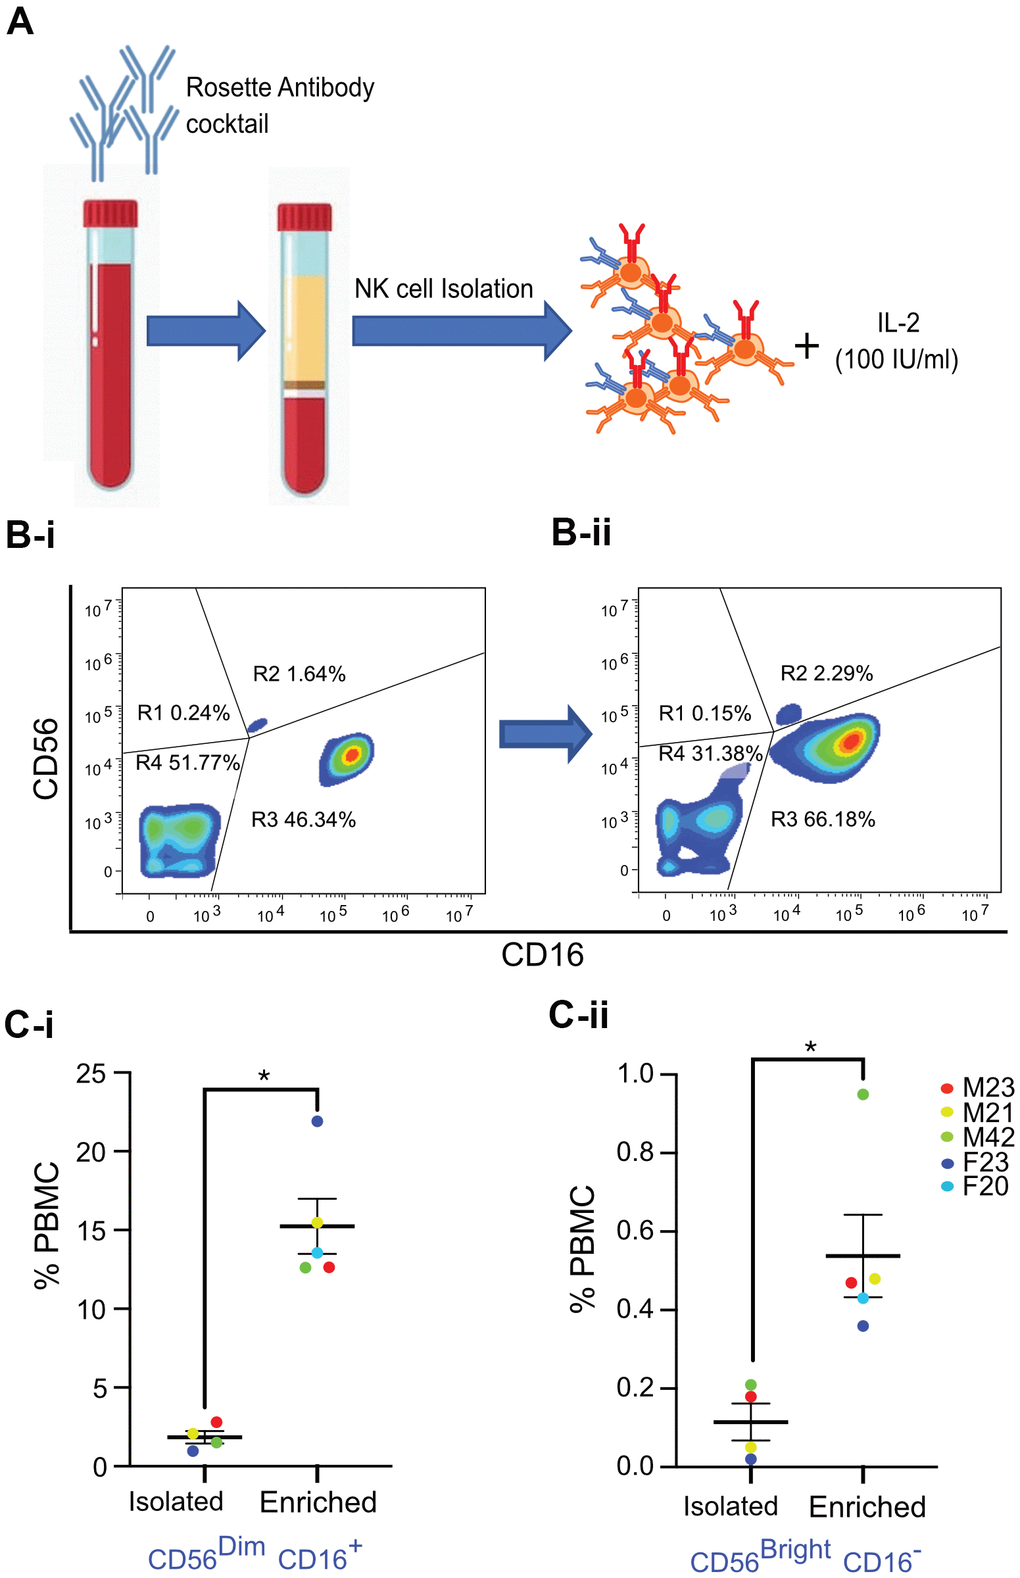 Isolation and enrichment strategy of primary NK cells from human PBMC. (A) Experimental design of the NK cell enrichment strategy. PBMCs were collected from multiple donors (ages 20-42 years old), and NK cells were isolated and enriched. (B) Flow cytometry analysis of CD56 and CD16 expression in NK cells before and after enrichment for a representative donor. (B-i) Before enrichment, 1.64% of NK cells (0.18% of PBMCs) were CD56Bright CD16- and 46.34% of NK cells (2.8% of PBMCs) were CD56Dim CD16+ NK cells. (B-ii) After enrichment, 2.29% of NK cells (0.47% of PBMCs) were CD56Bright CD16- and 66.18% of NK cells (12.6% of PBMCs) were CD56Dim CD16+ NK cells. (C-i) Average percentage of CD56Dim CD16+ NK cell population in PBMCs from five donors. (C-ii) Average percentage of CD56Bright CD16- NK cell population in PBMCs from five donors. Donor sex and age are indicated in the figure. Statistical analysis performed using paired t test. *p 